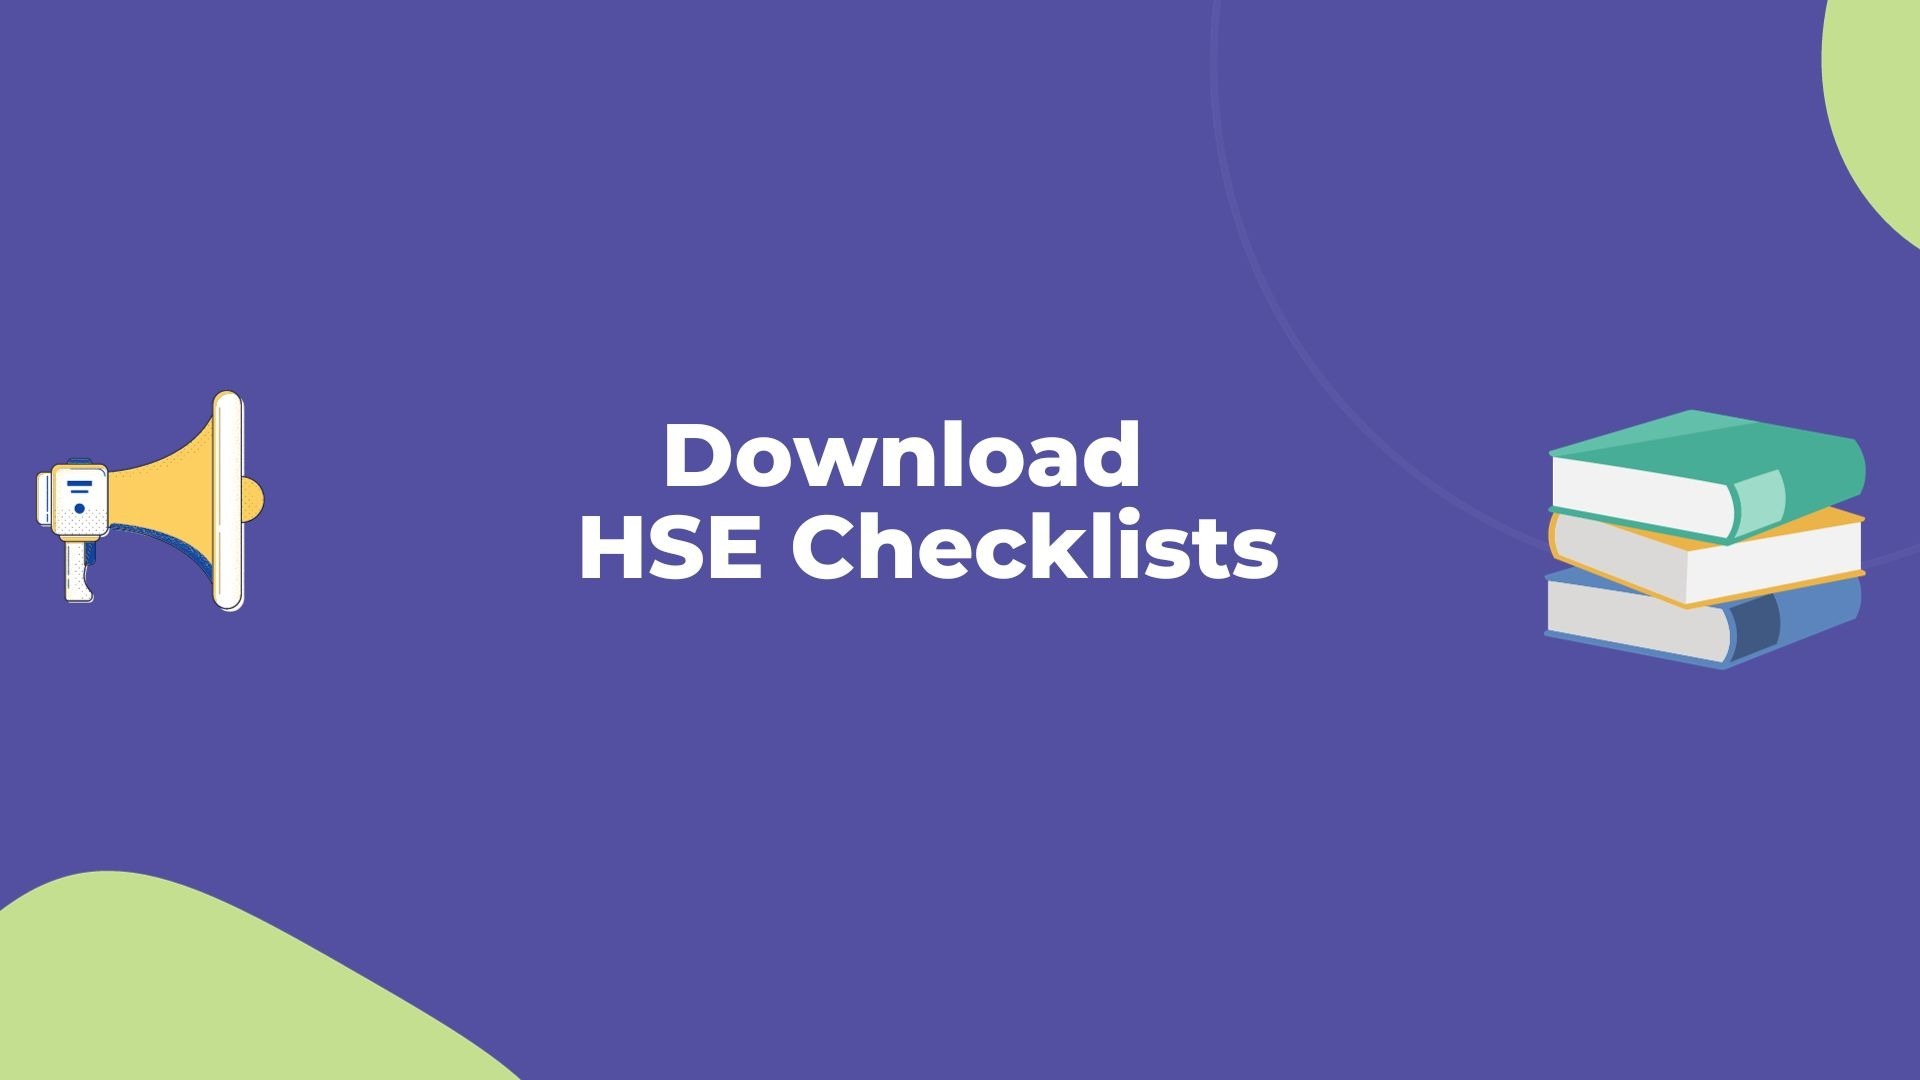 Download HSE Checklists and HSE Risk Asseements